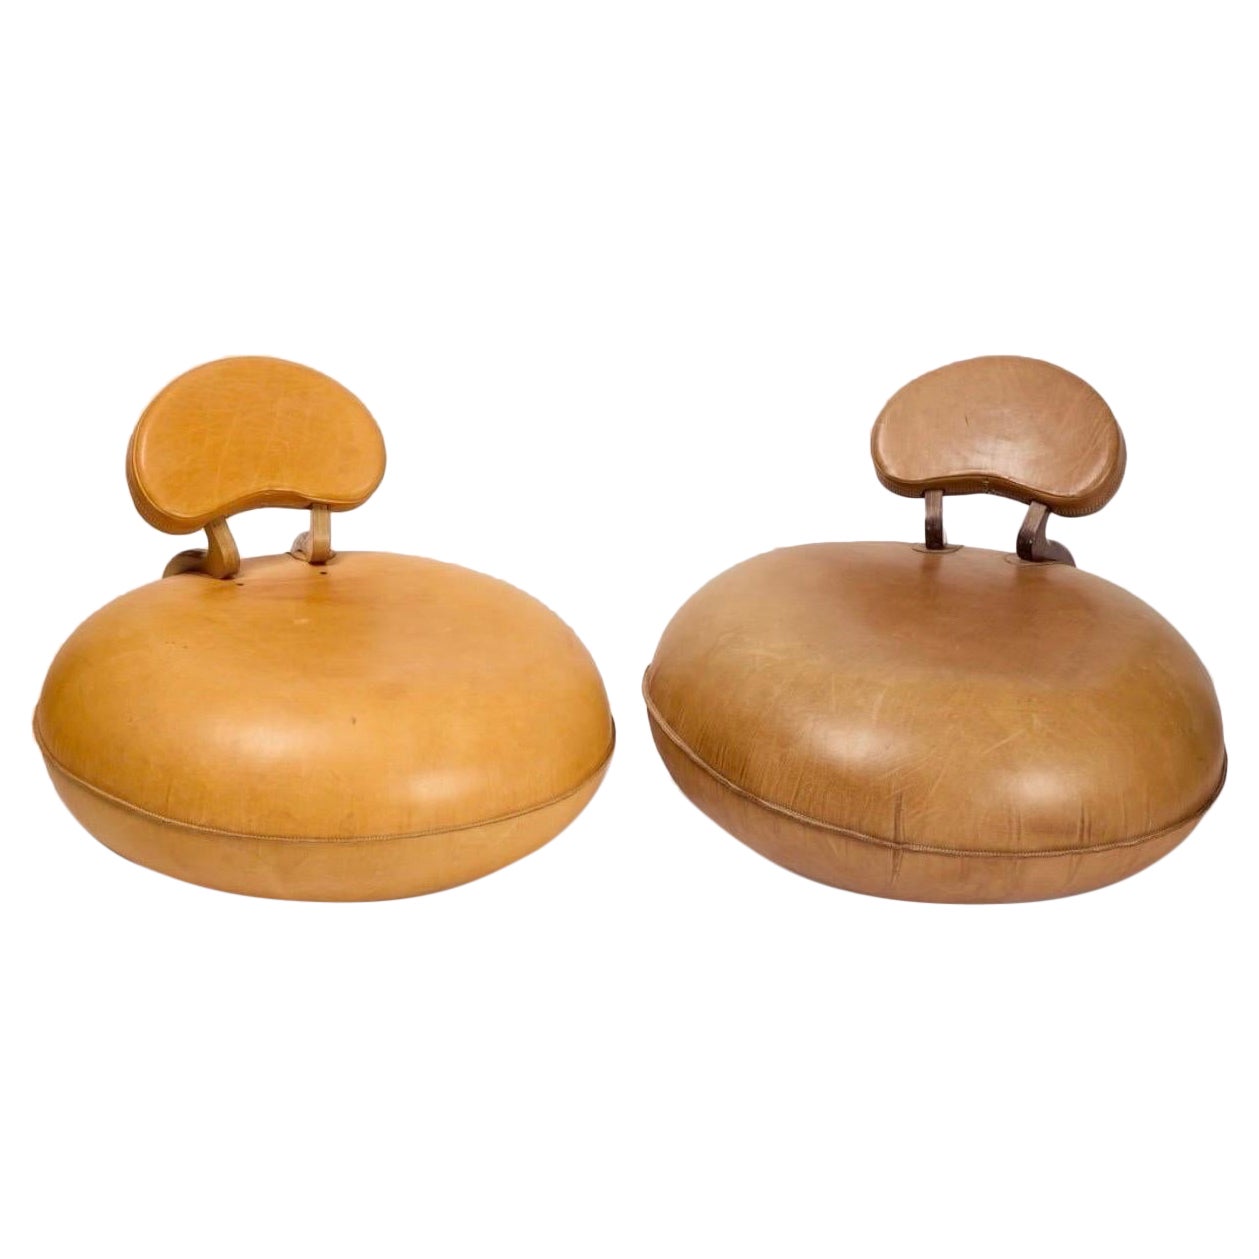 Pair of 1970's Leather Inflatable Chairs "Bake Bean"